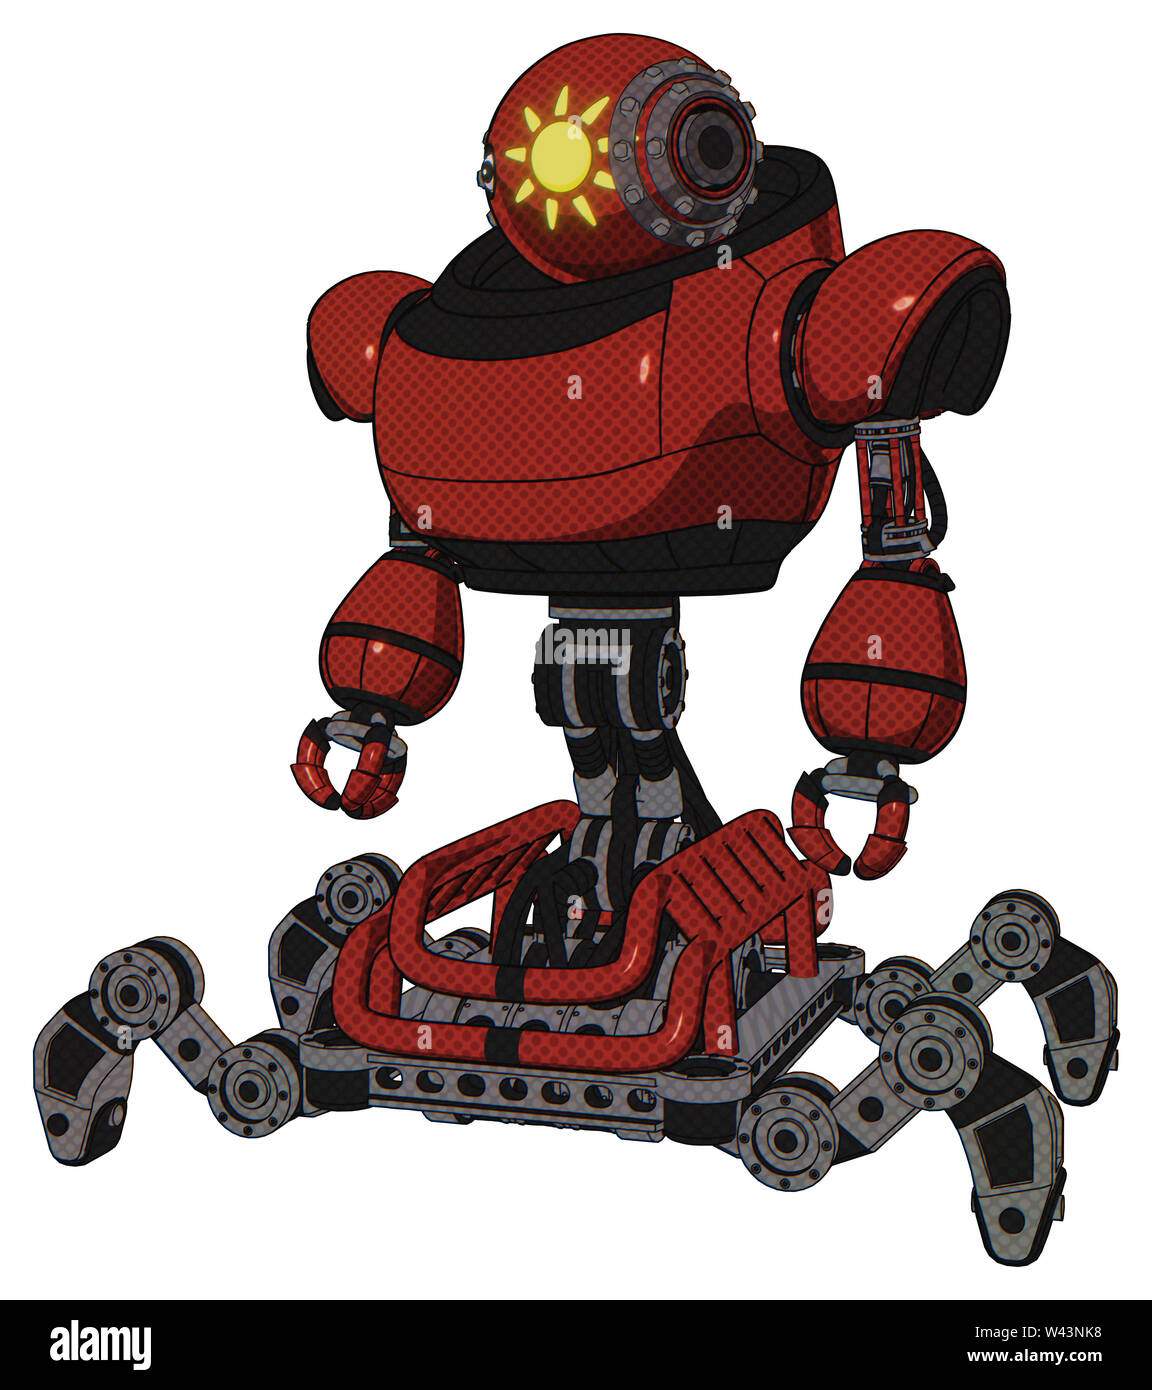 Accidentalmente Honorable Ten cuidado Bot containing elements: oval wide head, sunshine patch eye, steampunk iron  bands with bolts, heavy upper chest, insect walker legs. Material: cherry  Stock Photo - Alamy